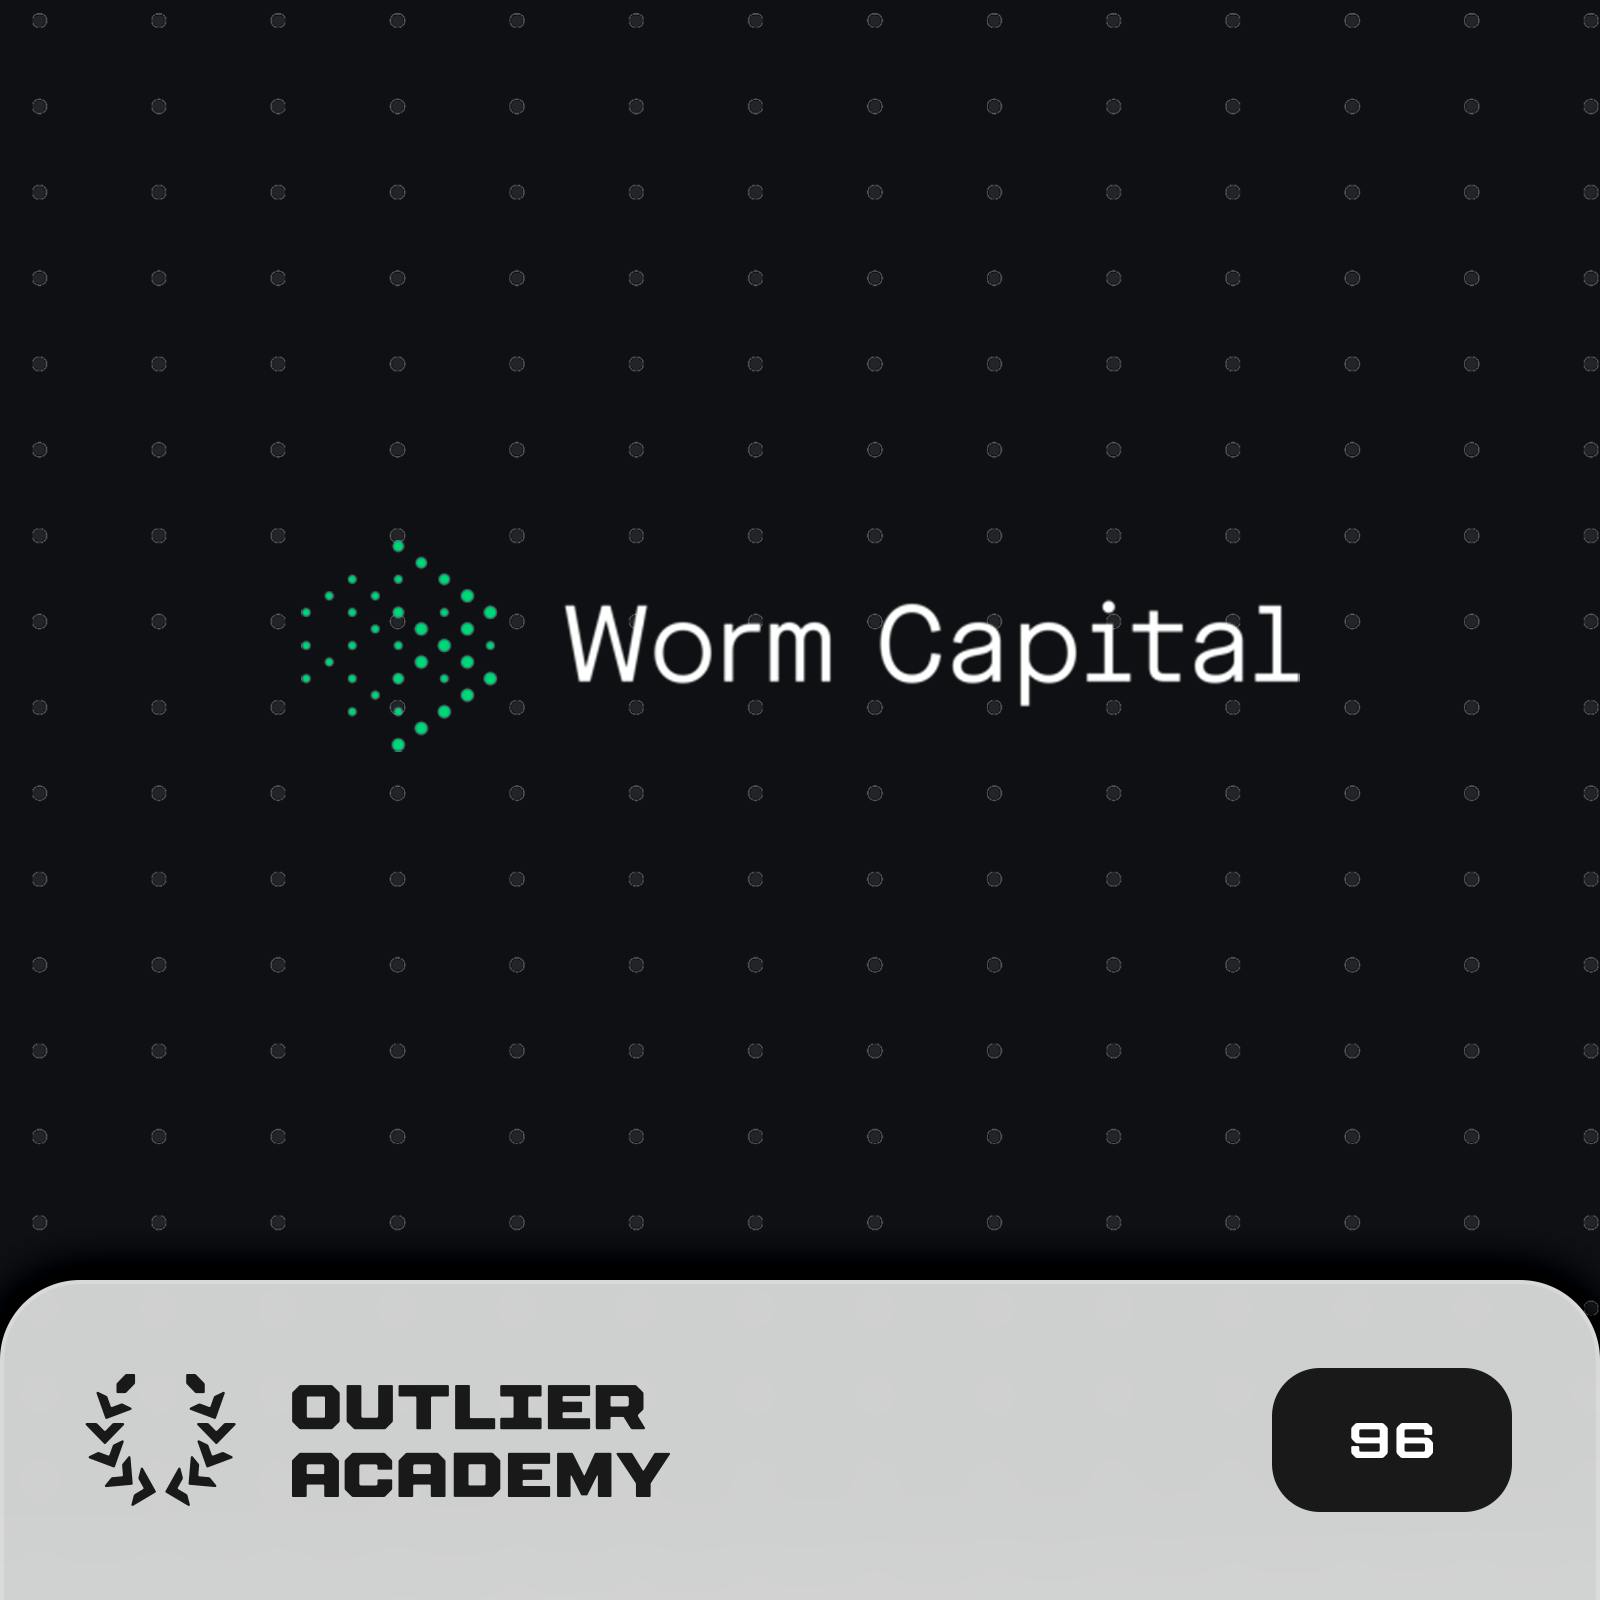 Worm Capital: Investing in Disruptive Technology, Worm Theory, and The Worm Algorithm | Outlier Investors Image